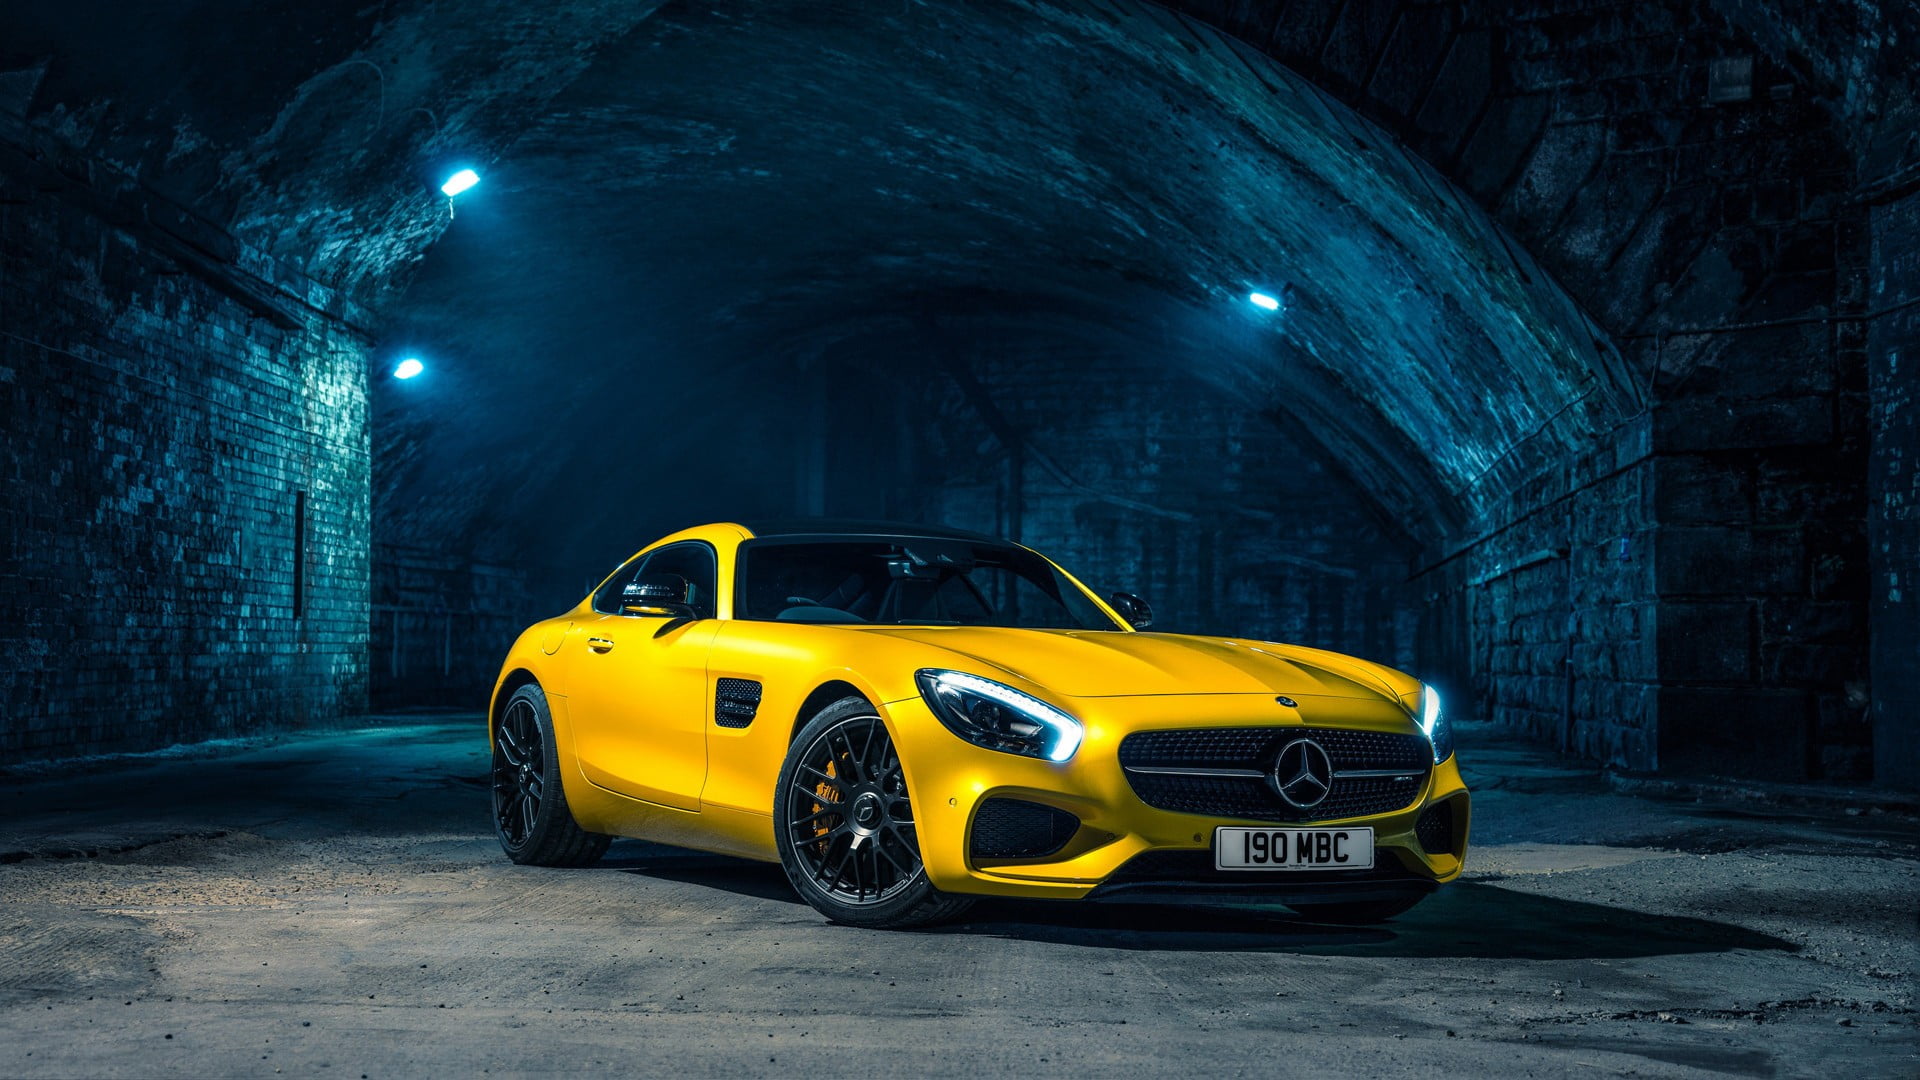 yellow Mercedes-Benz coupe, Mercedes-Benz AMG GT, car, mode of transportation